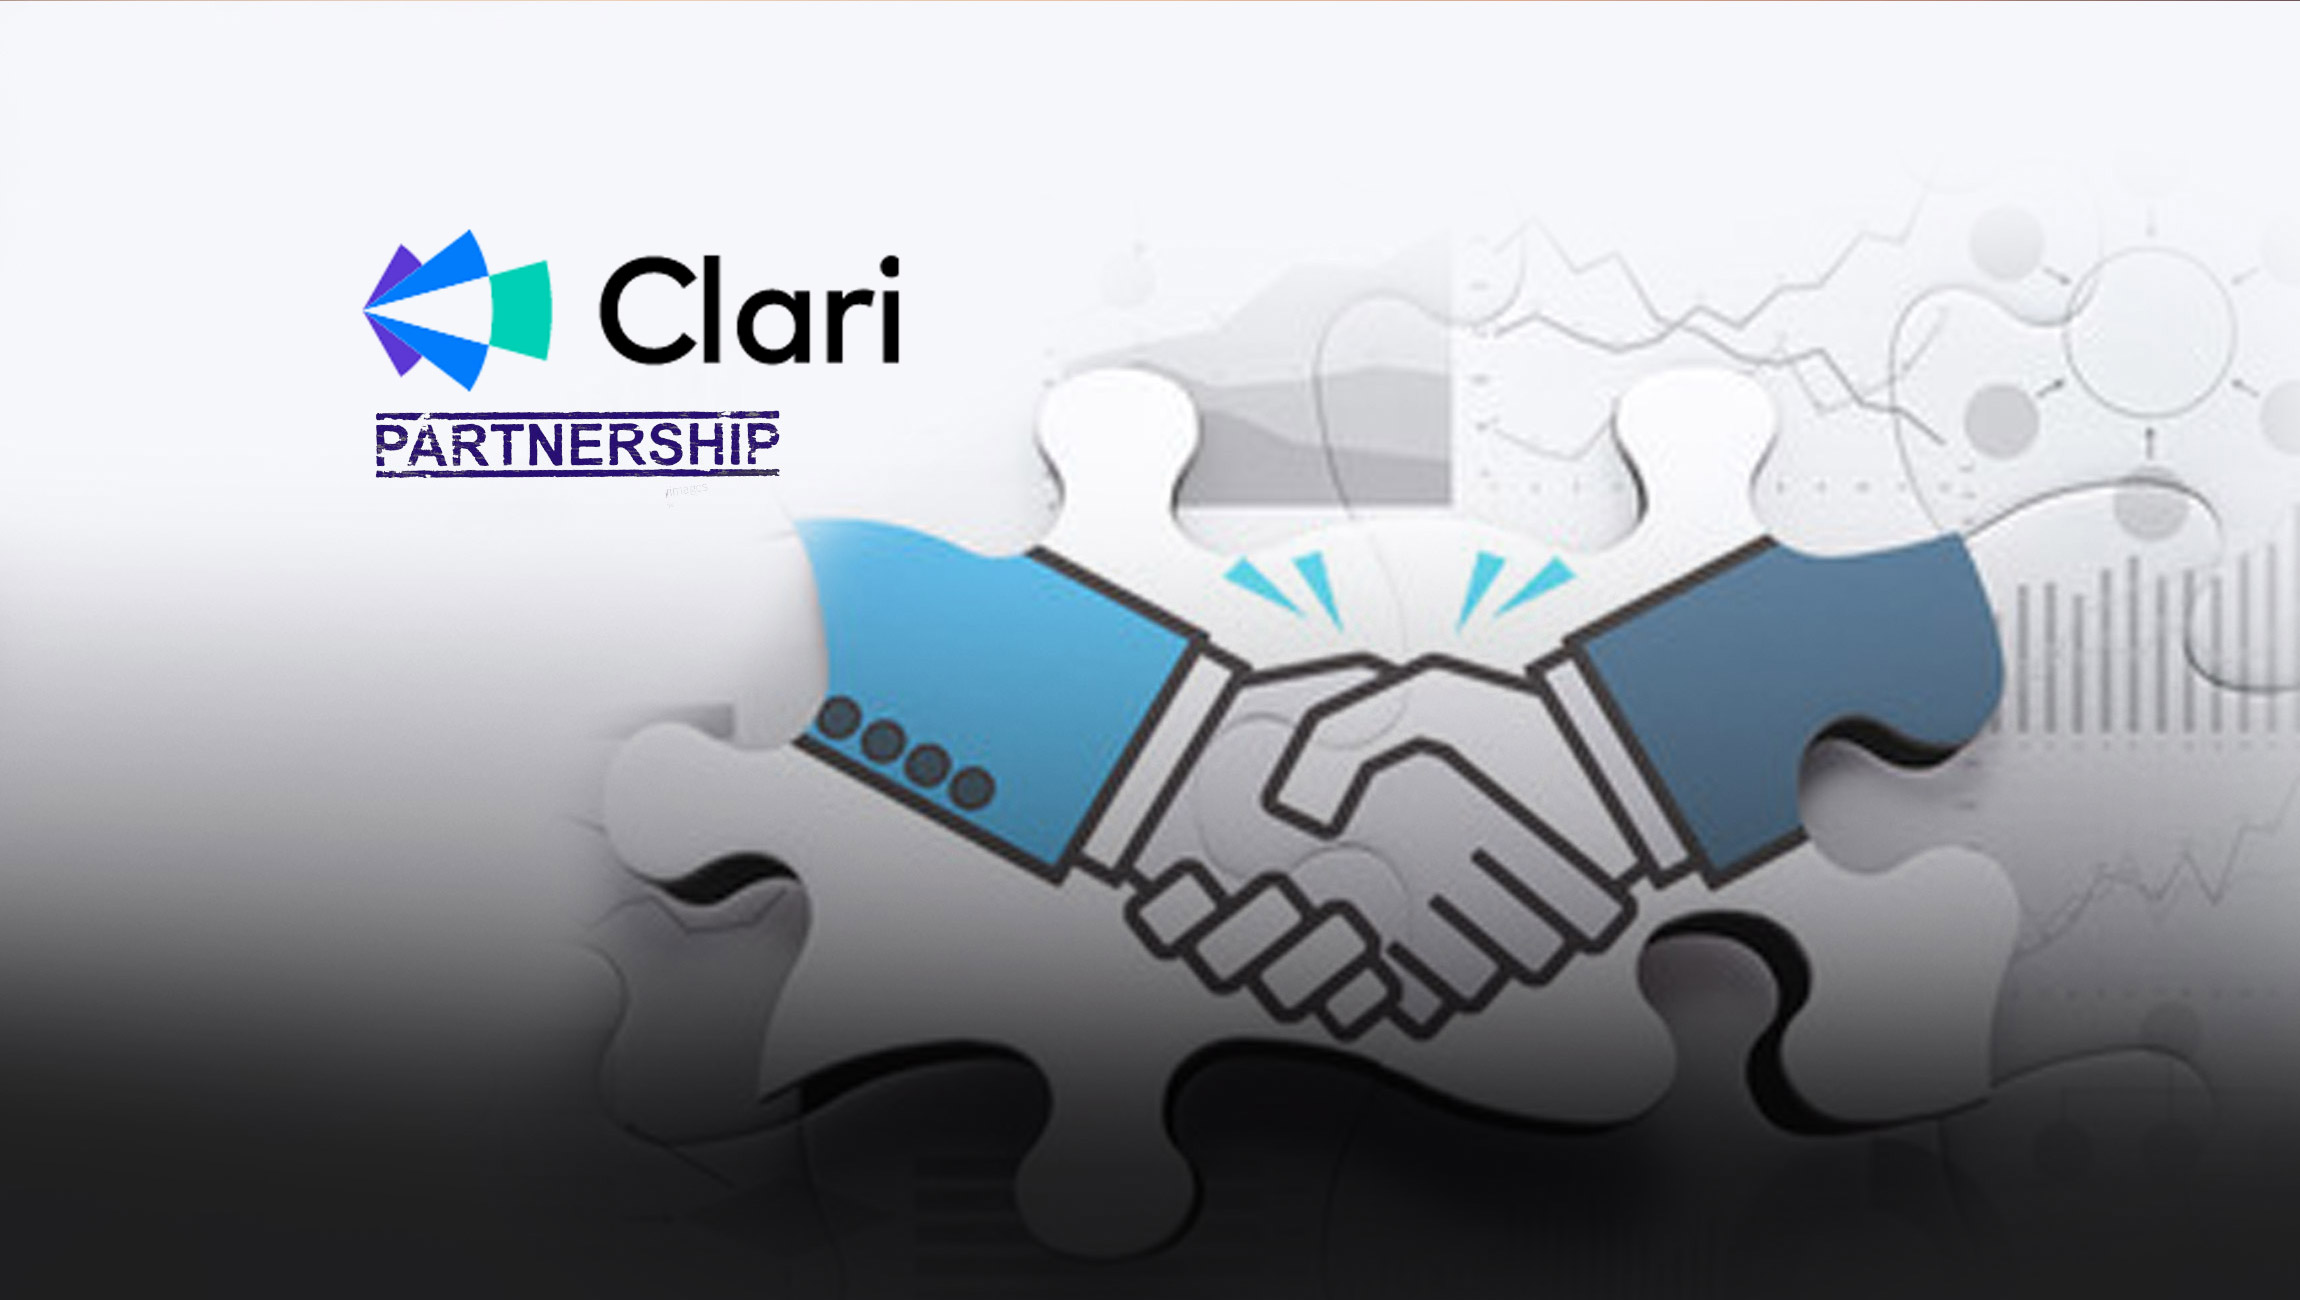 Clari Secures Workday as Strategic Investor and Partner